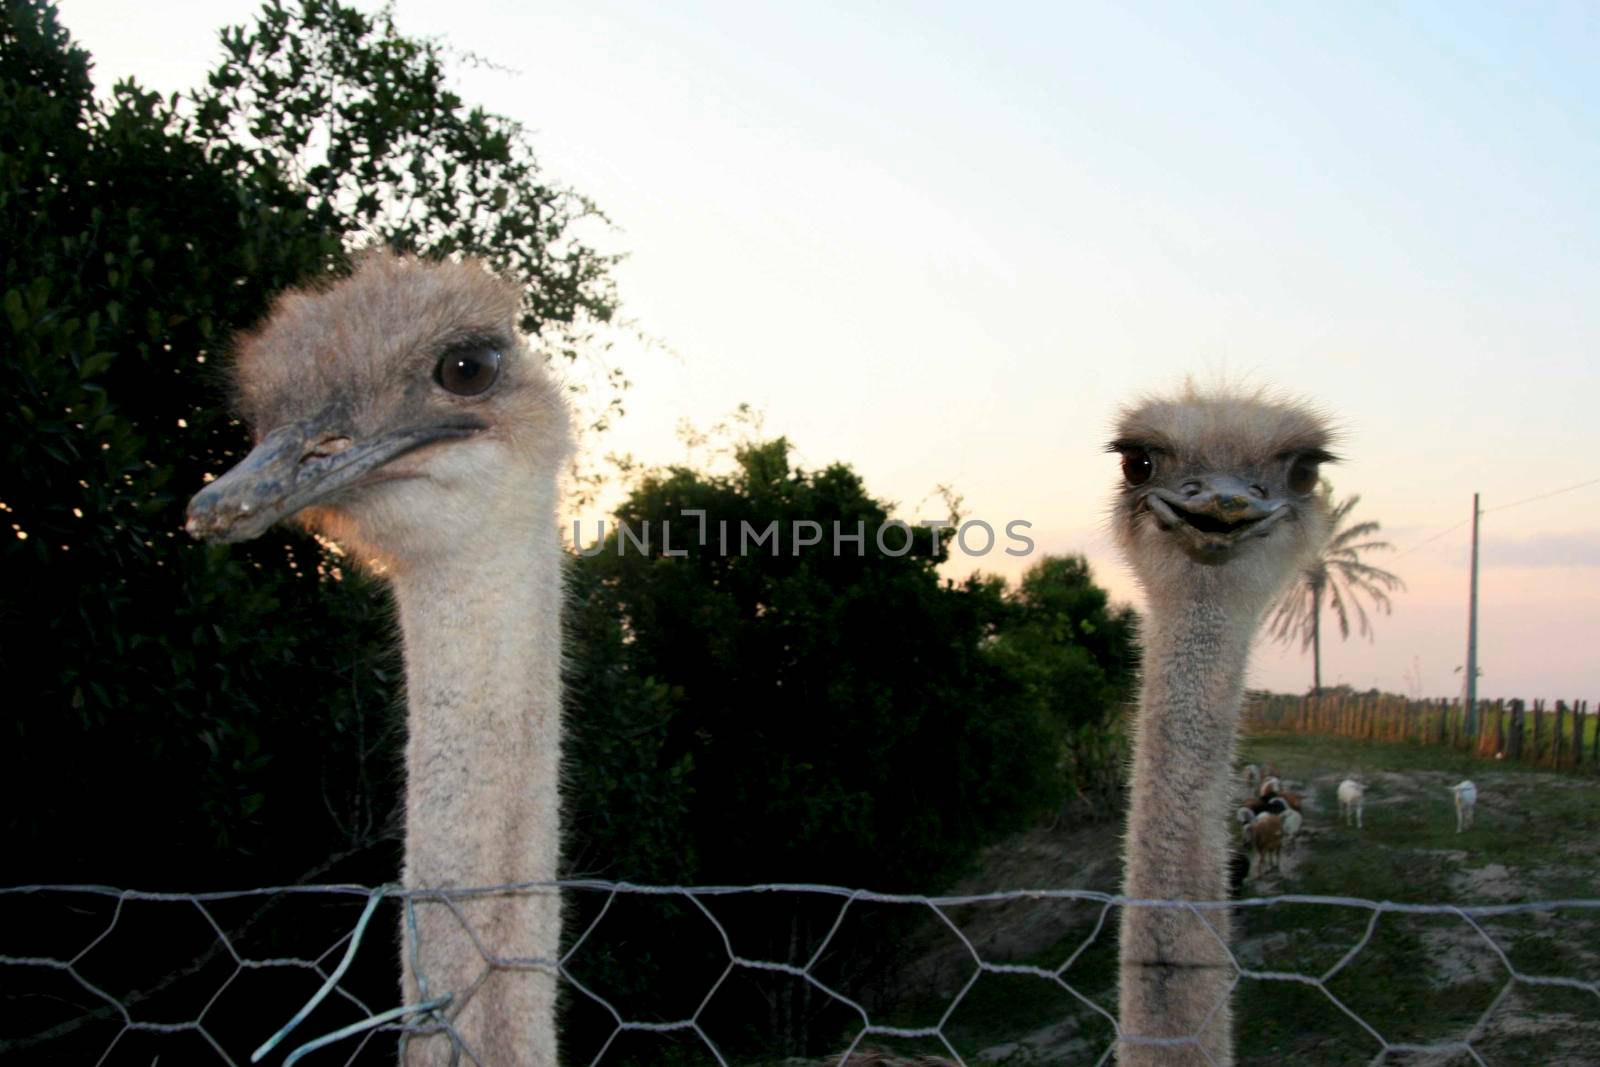 conde, bahia / brazil - december 23, 2013: Ostrich is seen on breeding farm in the city of Conde.